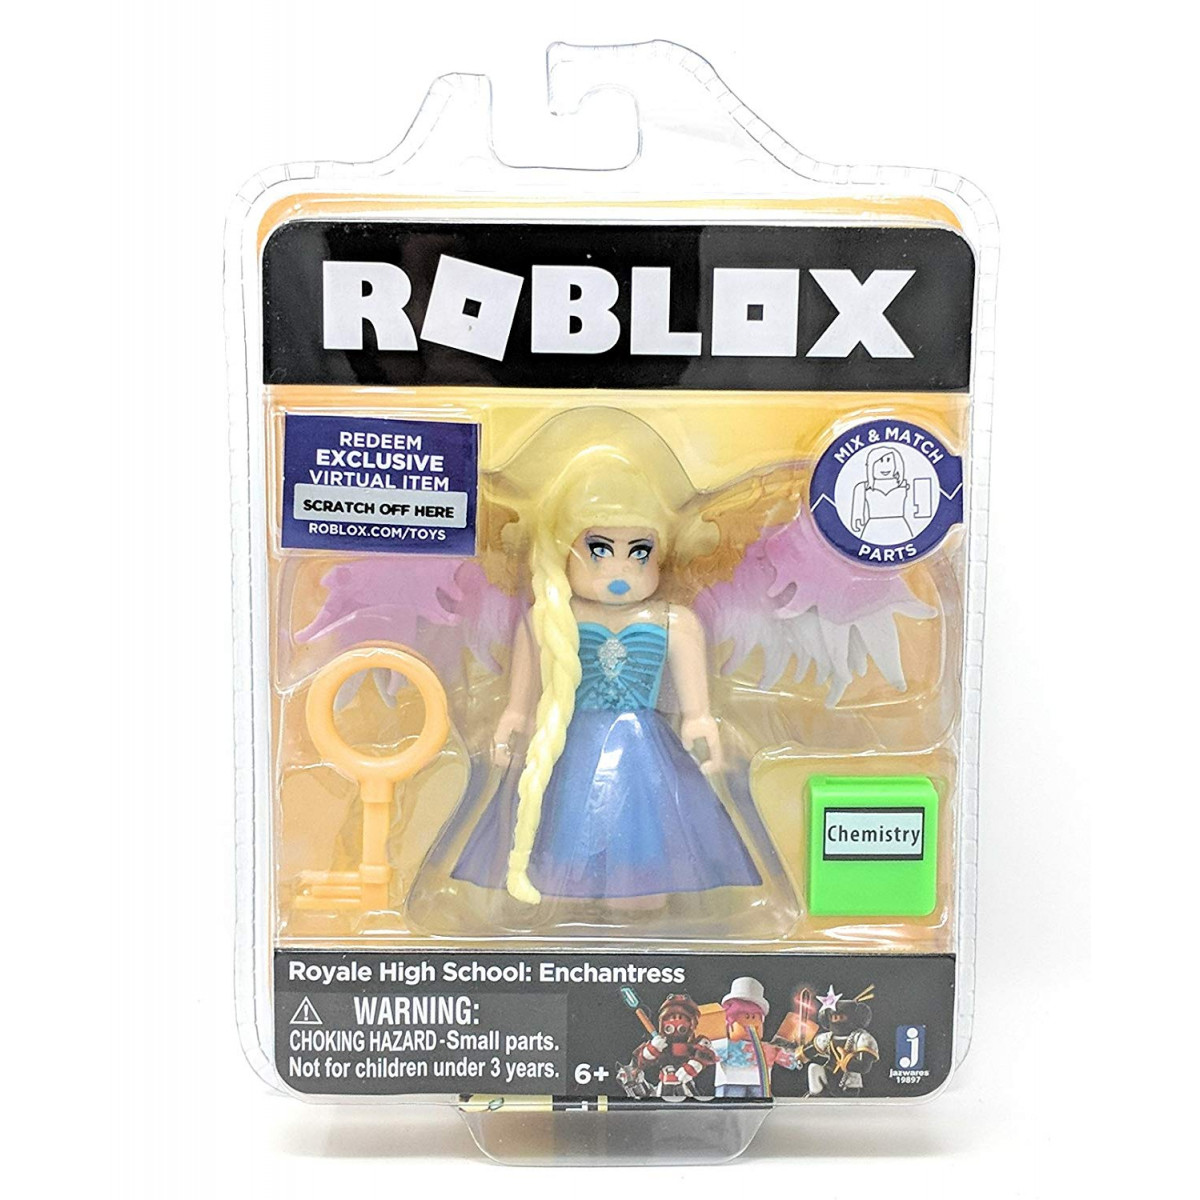 Roblox Gold Collection Royale High School Enchantress Single Figure Pack With Exclusive Virtual Item Code - details about roblox action figures roblox high school with code series 1